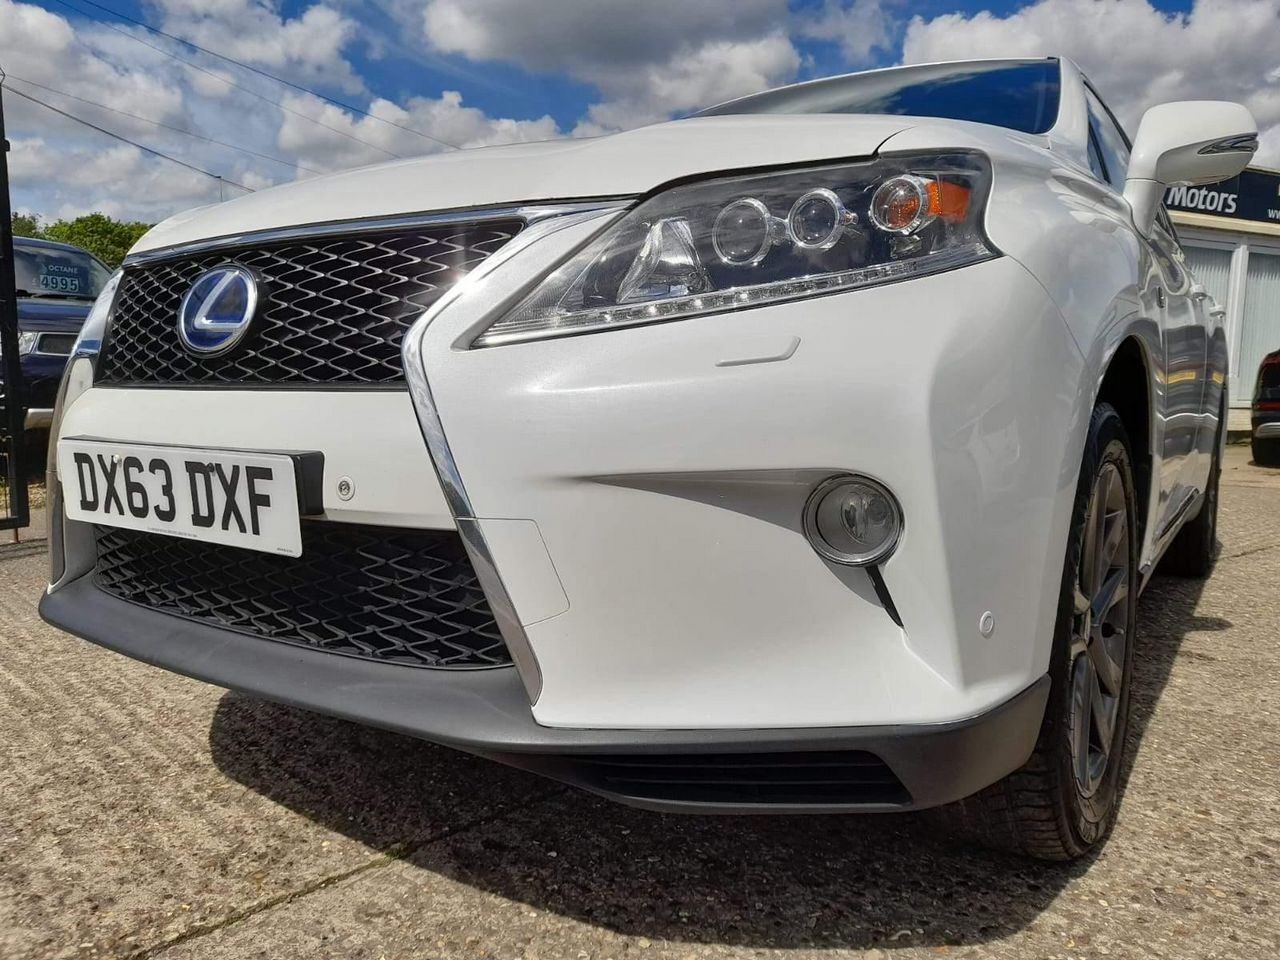 2013 Lexus RX 3.5 450h V6 F Sport SUV 5dr Petrol Hybrid CVT 4WD Euro 5 (s/s) (299 ps) - Picture 4 of 53